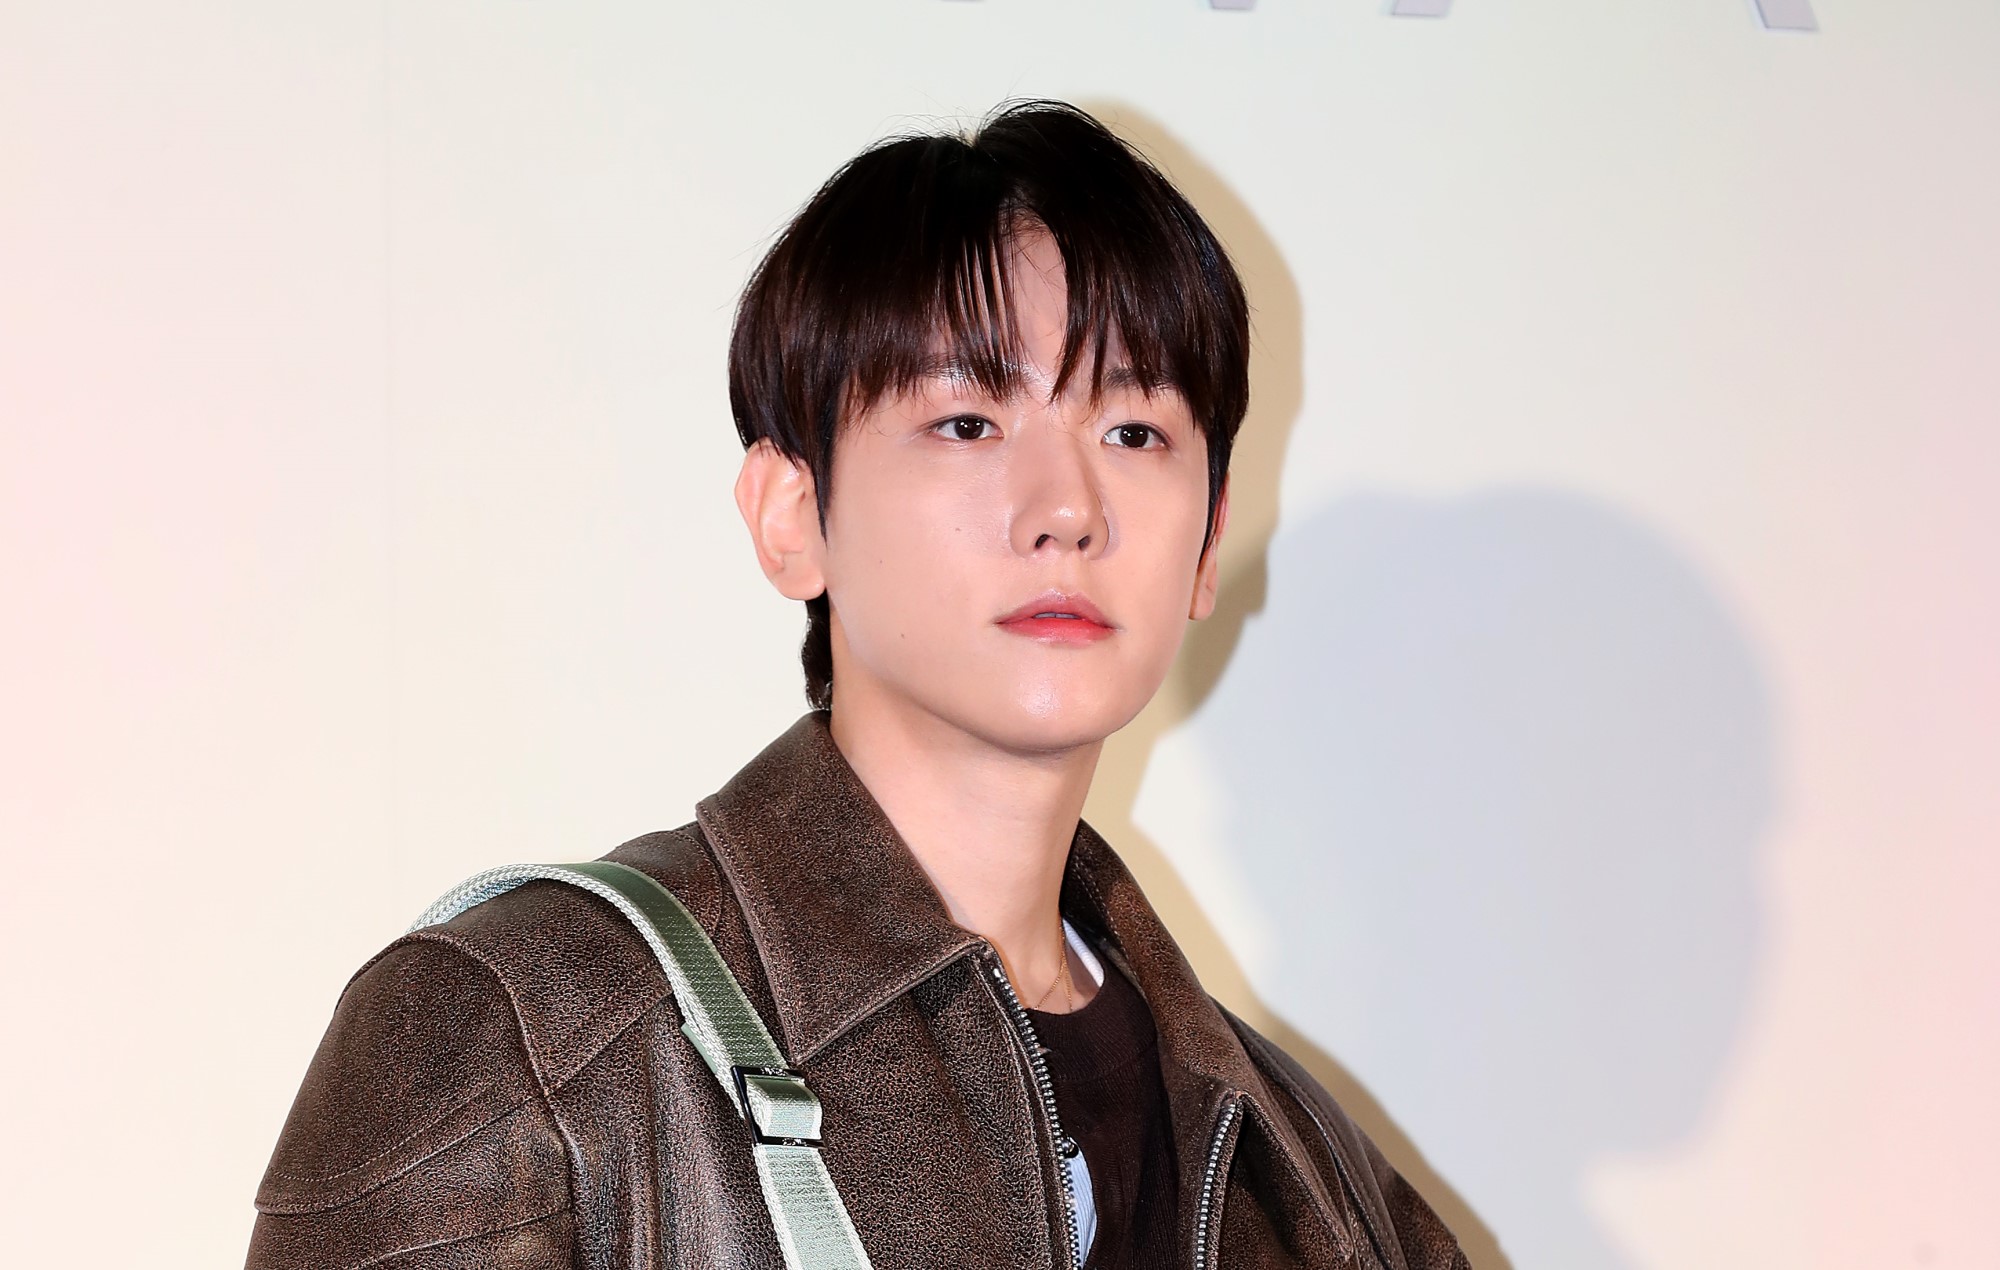 EXO’s Baekhyun gives update on new music: “It’s at that stage of filming the music video”